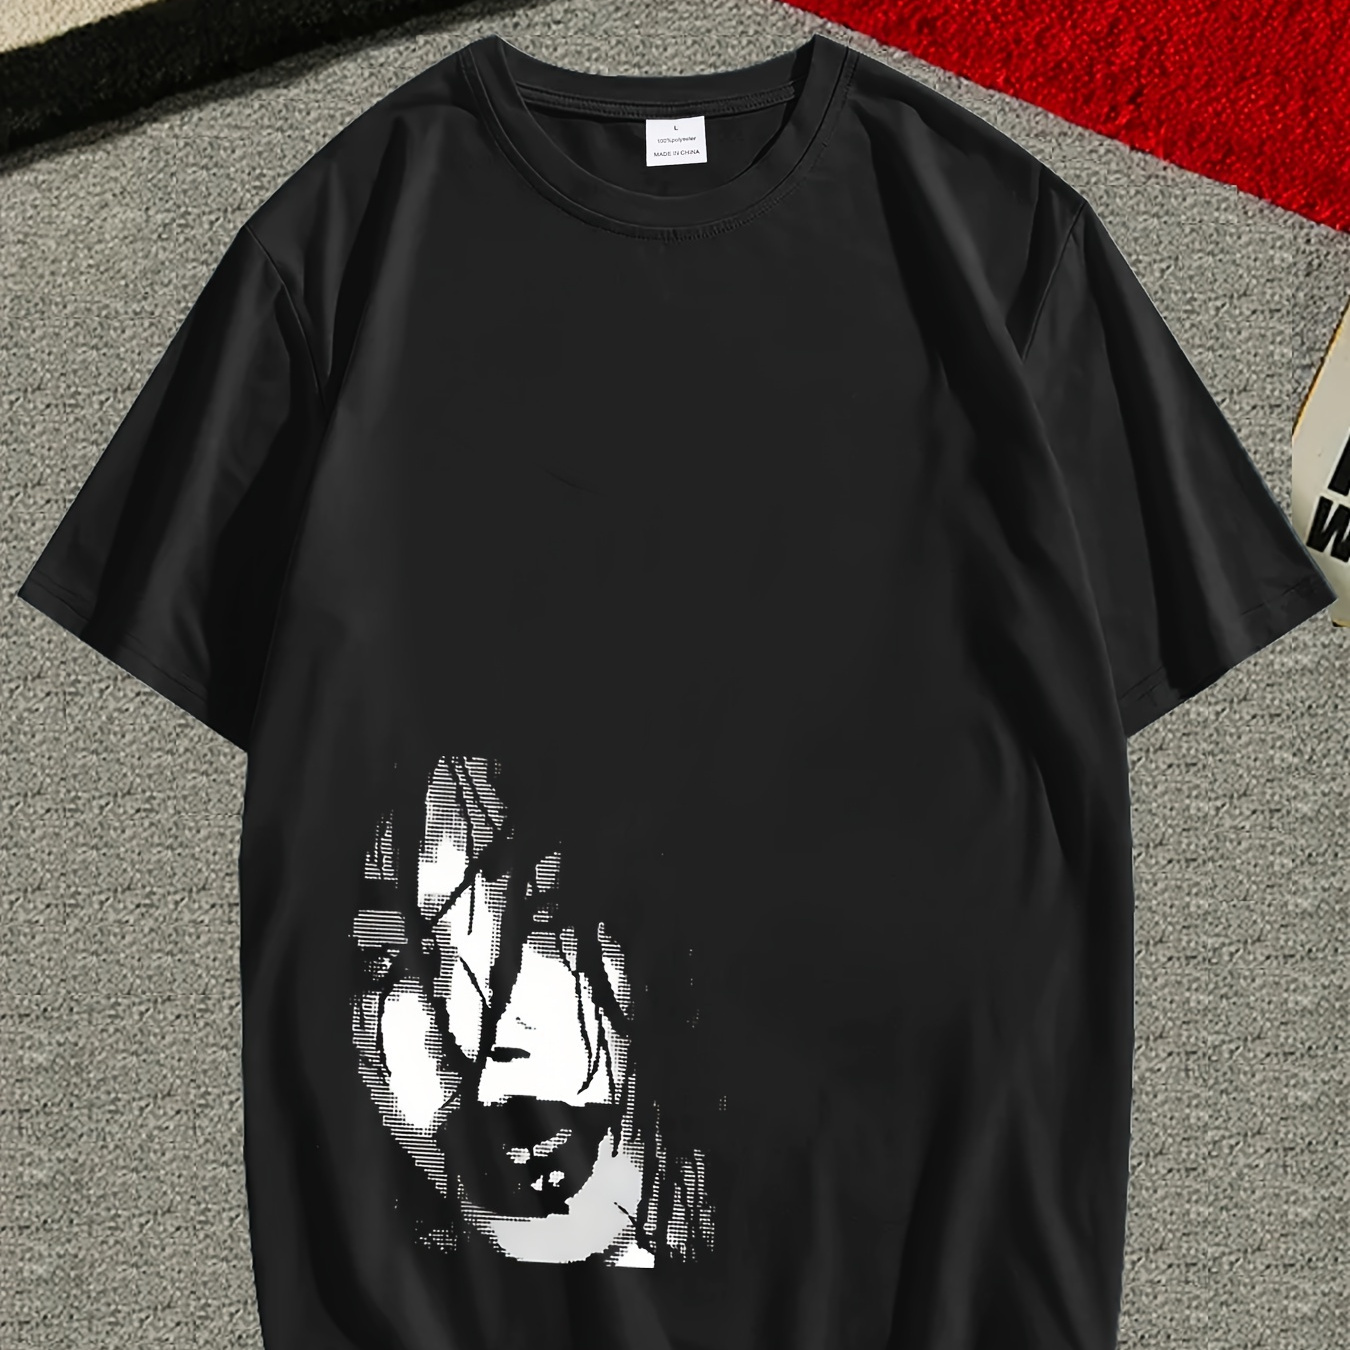 

Gothic Girl Print Tee Shirt, Tees For Men, Casual Short Sleeve T-shirt For Summer